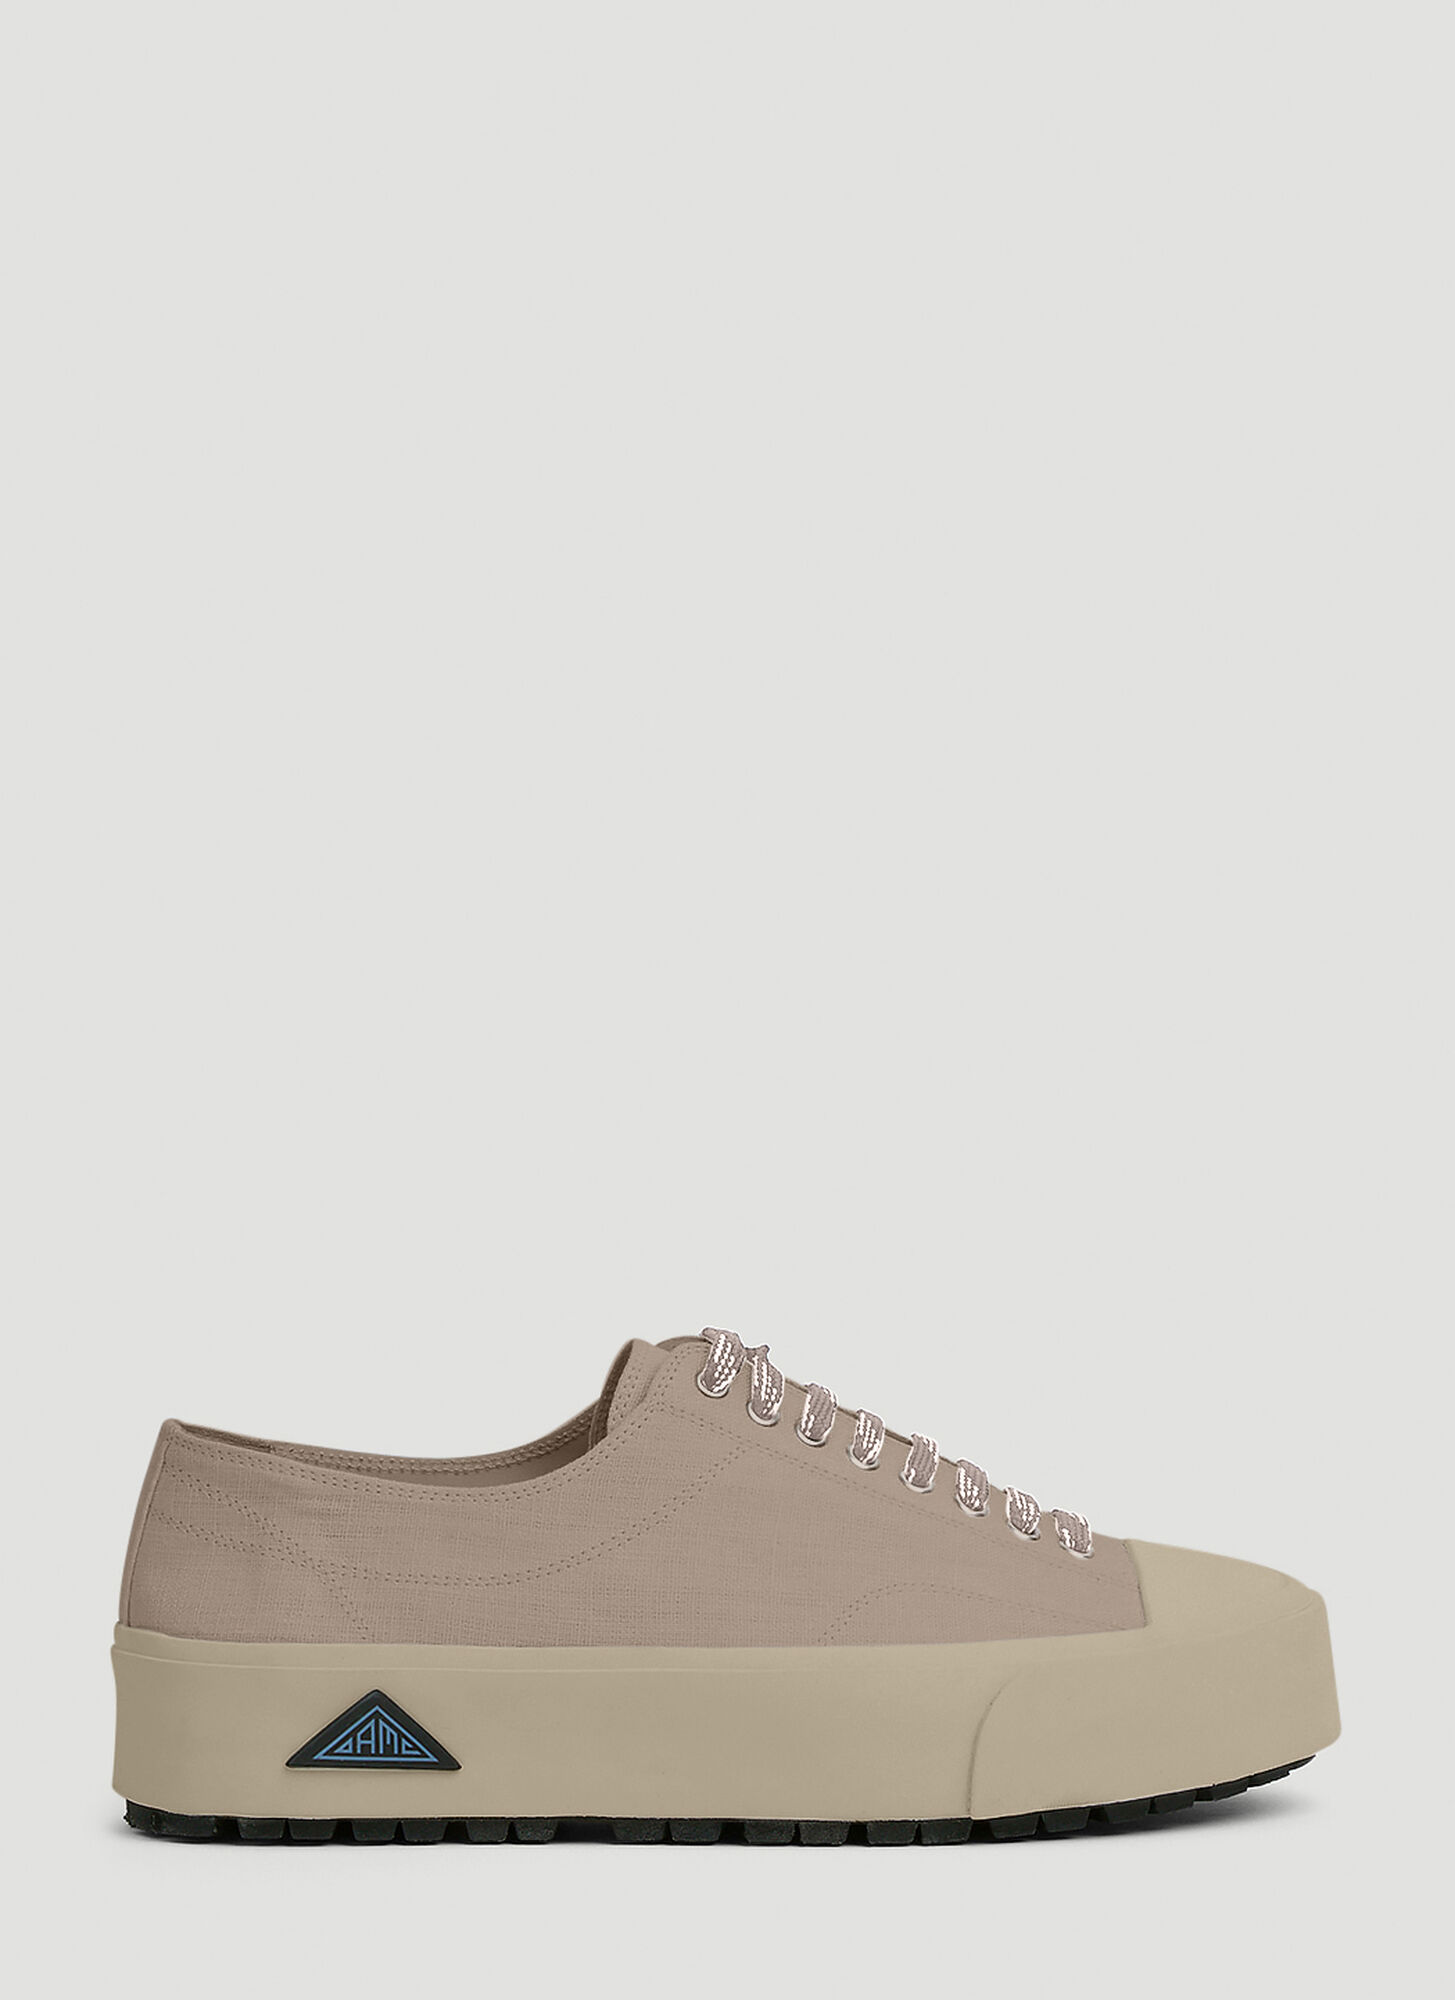 Oamc Logo Patch Lace Up Sneakers In Beige